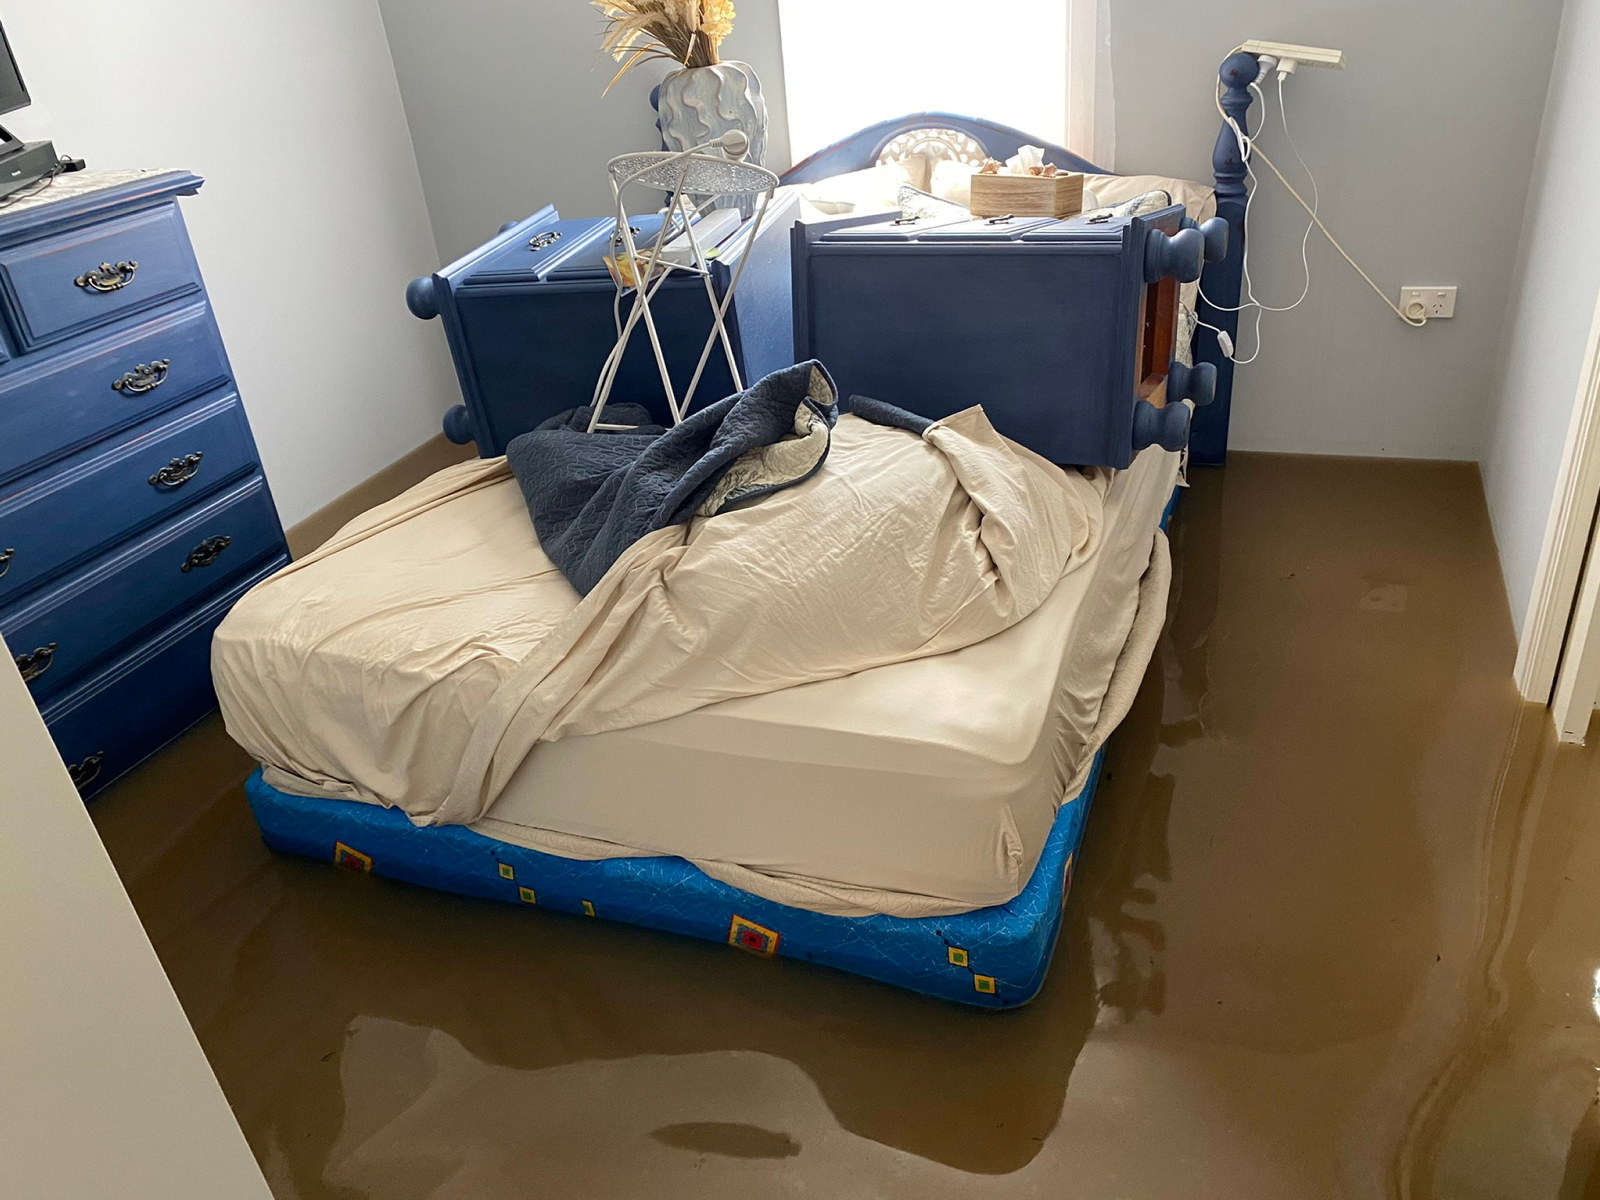 Internal damage caused by the NSW floods in 2022 in the West Ballina area (submission 0537)